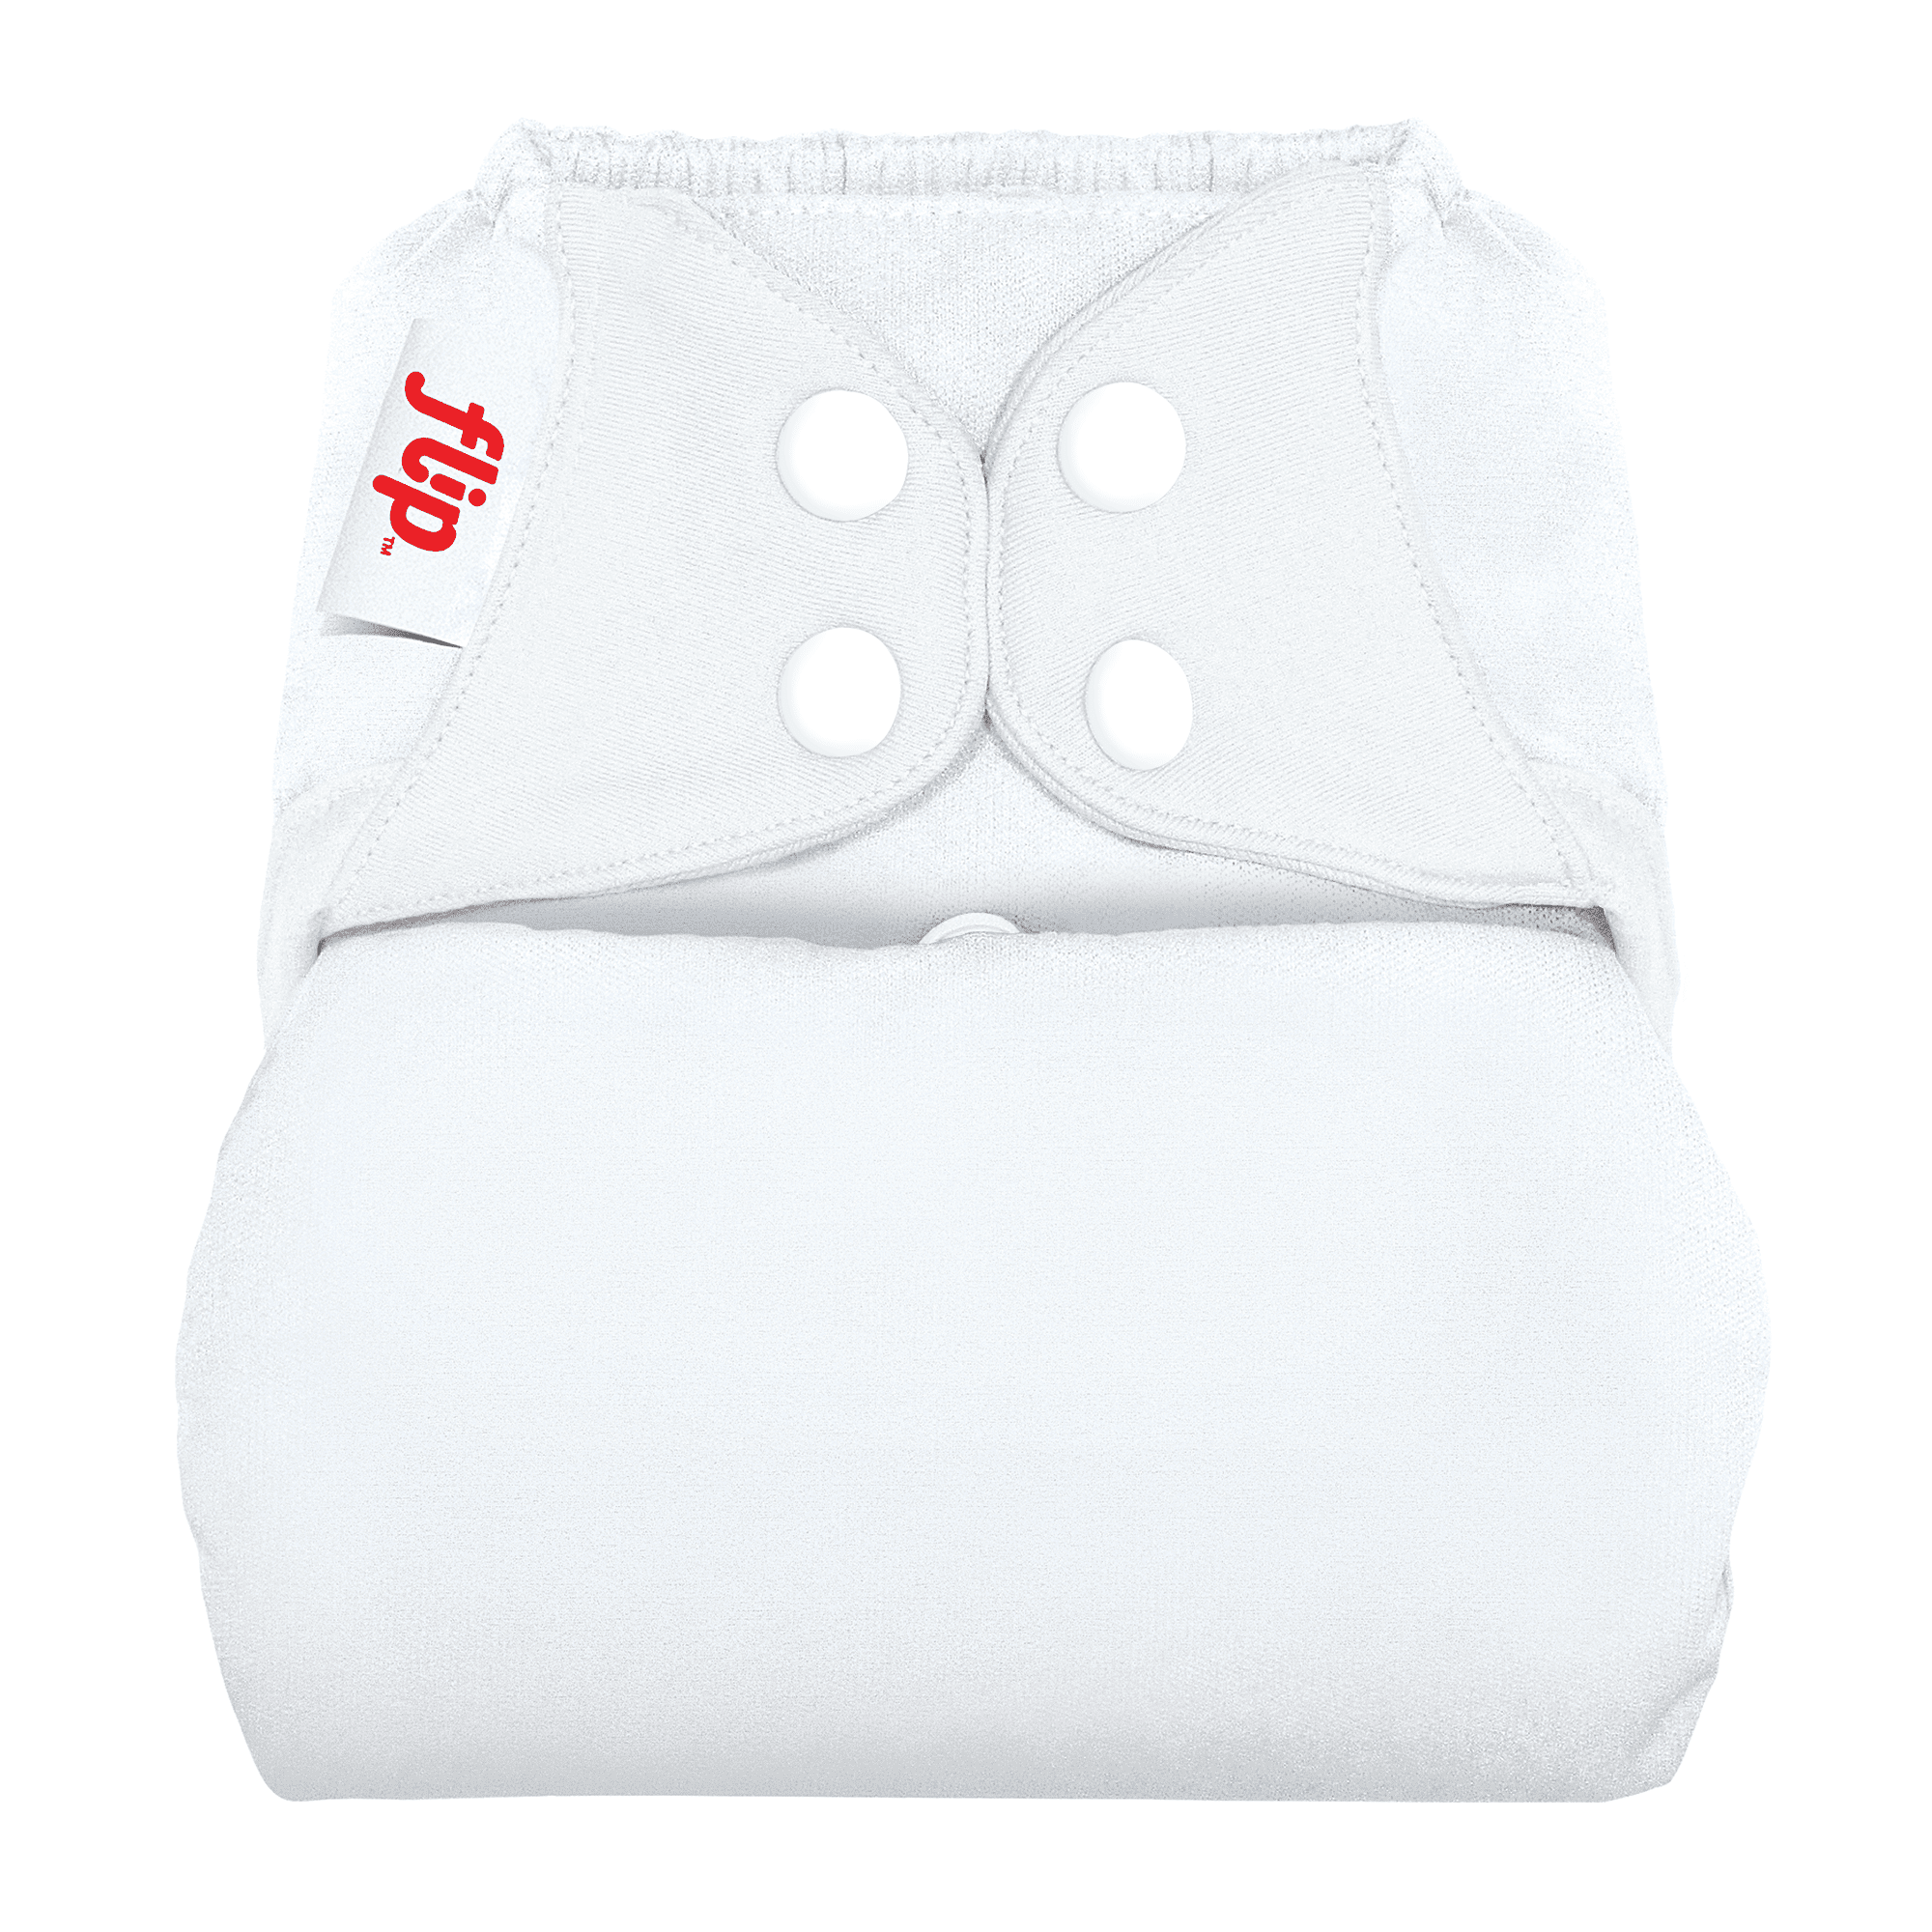 Fits Babies from 8 to 35 Cattitude Flip Hybrid Reusable Cloth Diaper Cover with Adjustable Snaps and Stretchy Tabs Pounds 